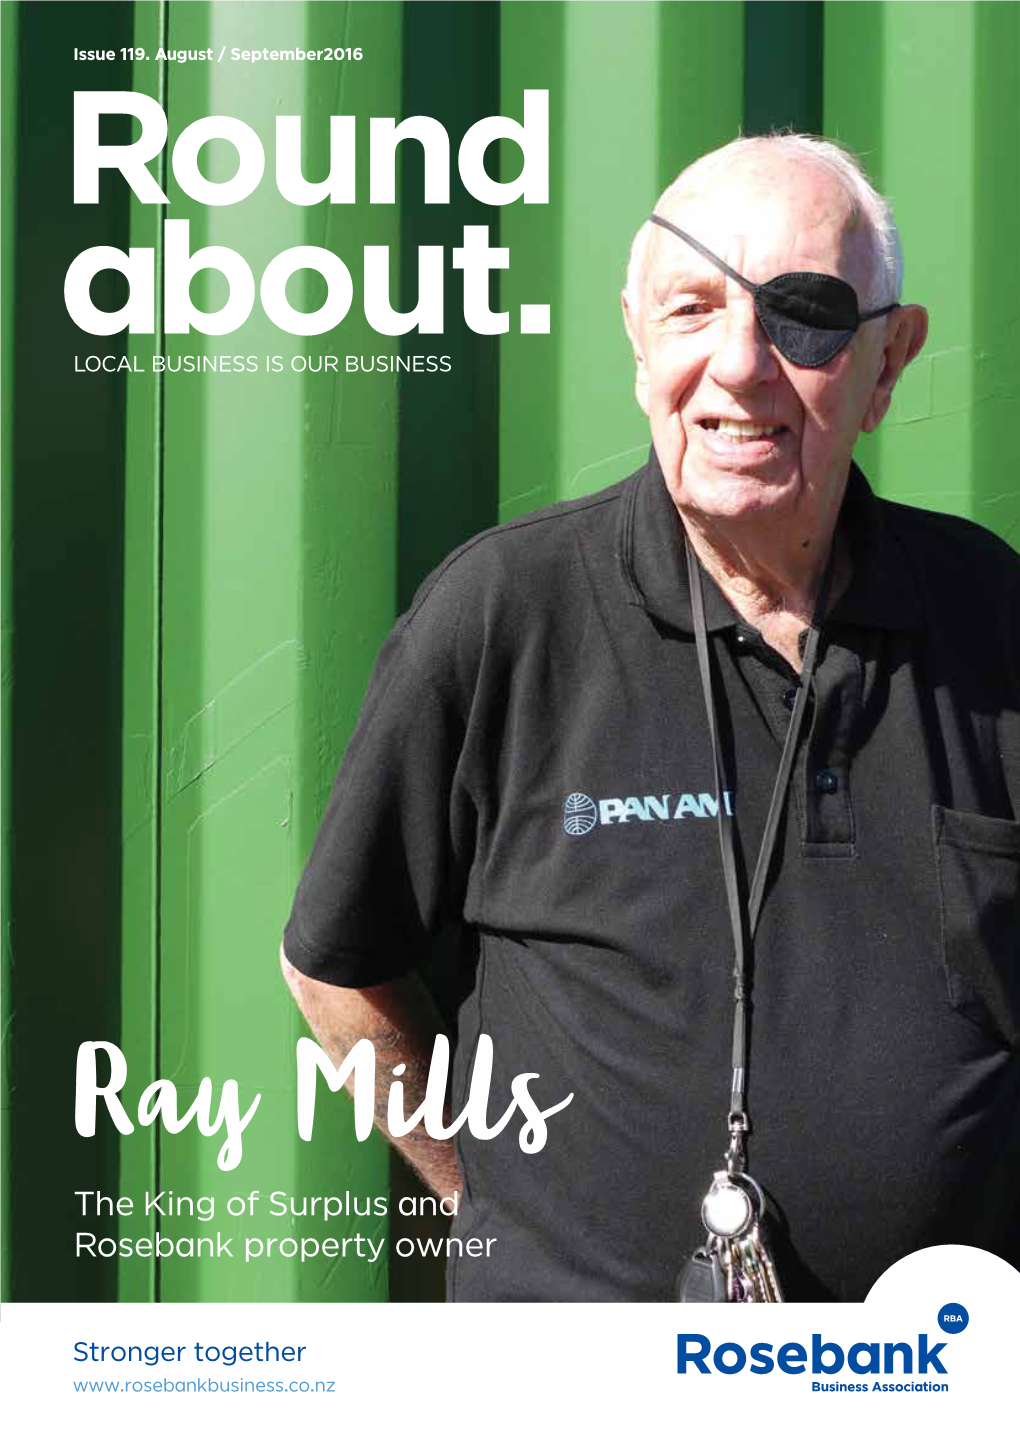 Ray Mills - the King Surplus